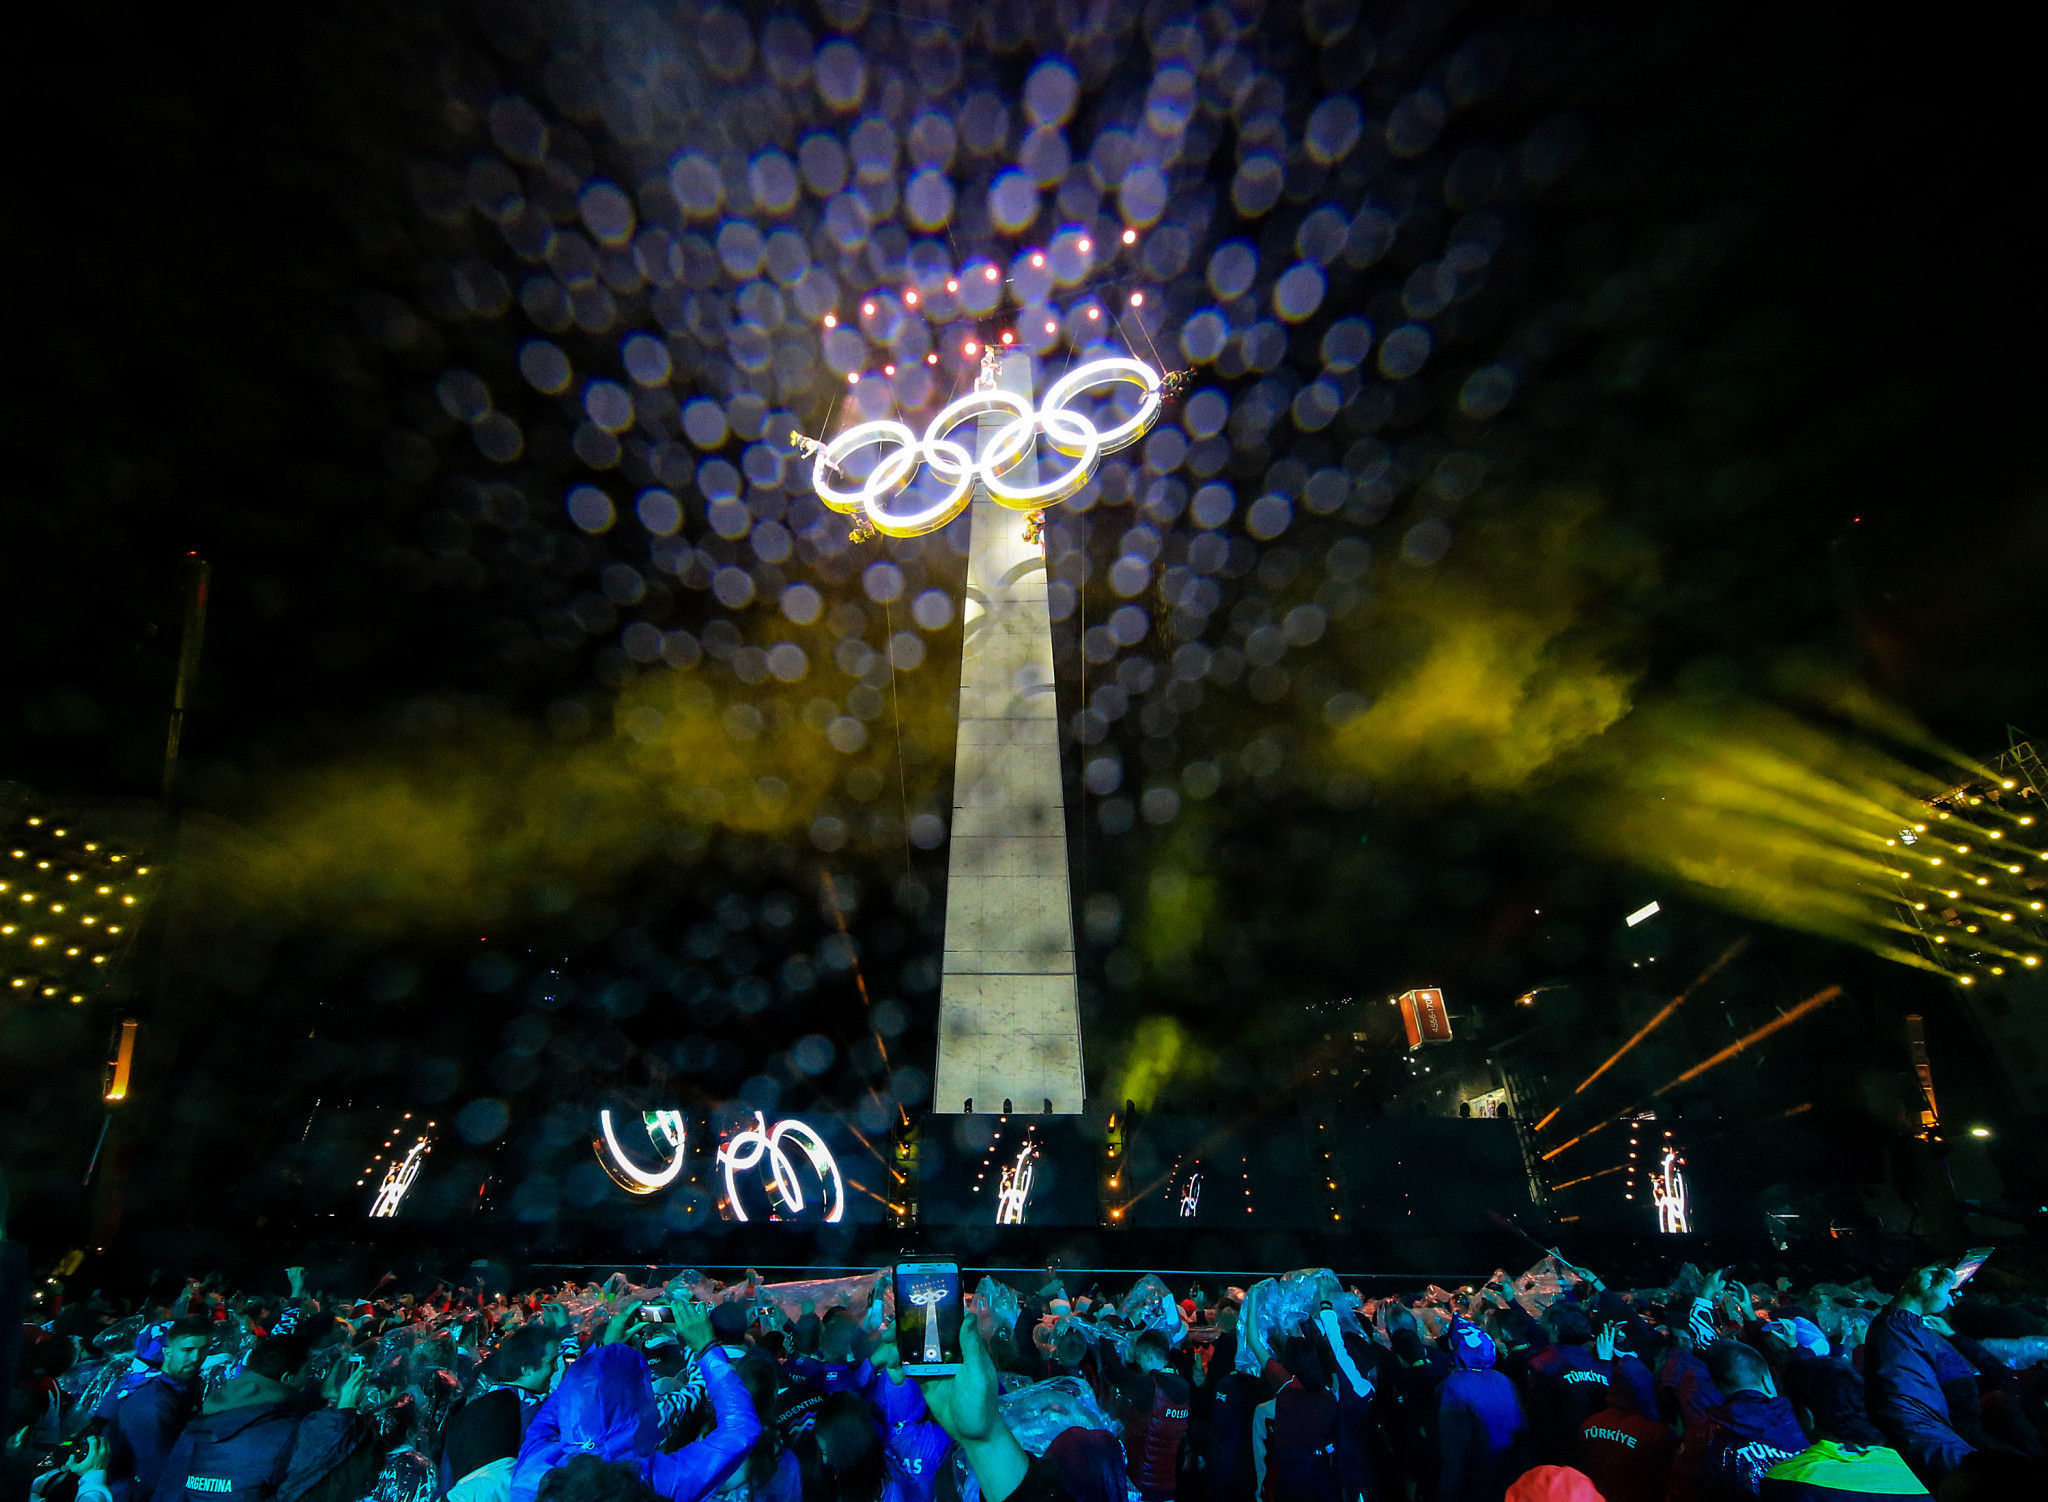 A city-centre Opening Ceremony for the Buenos Aires 2018 Youth Olympic Games made use of the city's famous Obelisk ©Getty Images